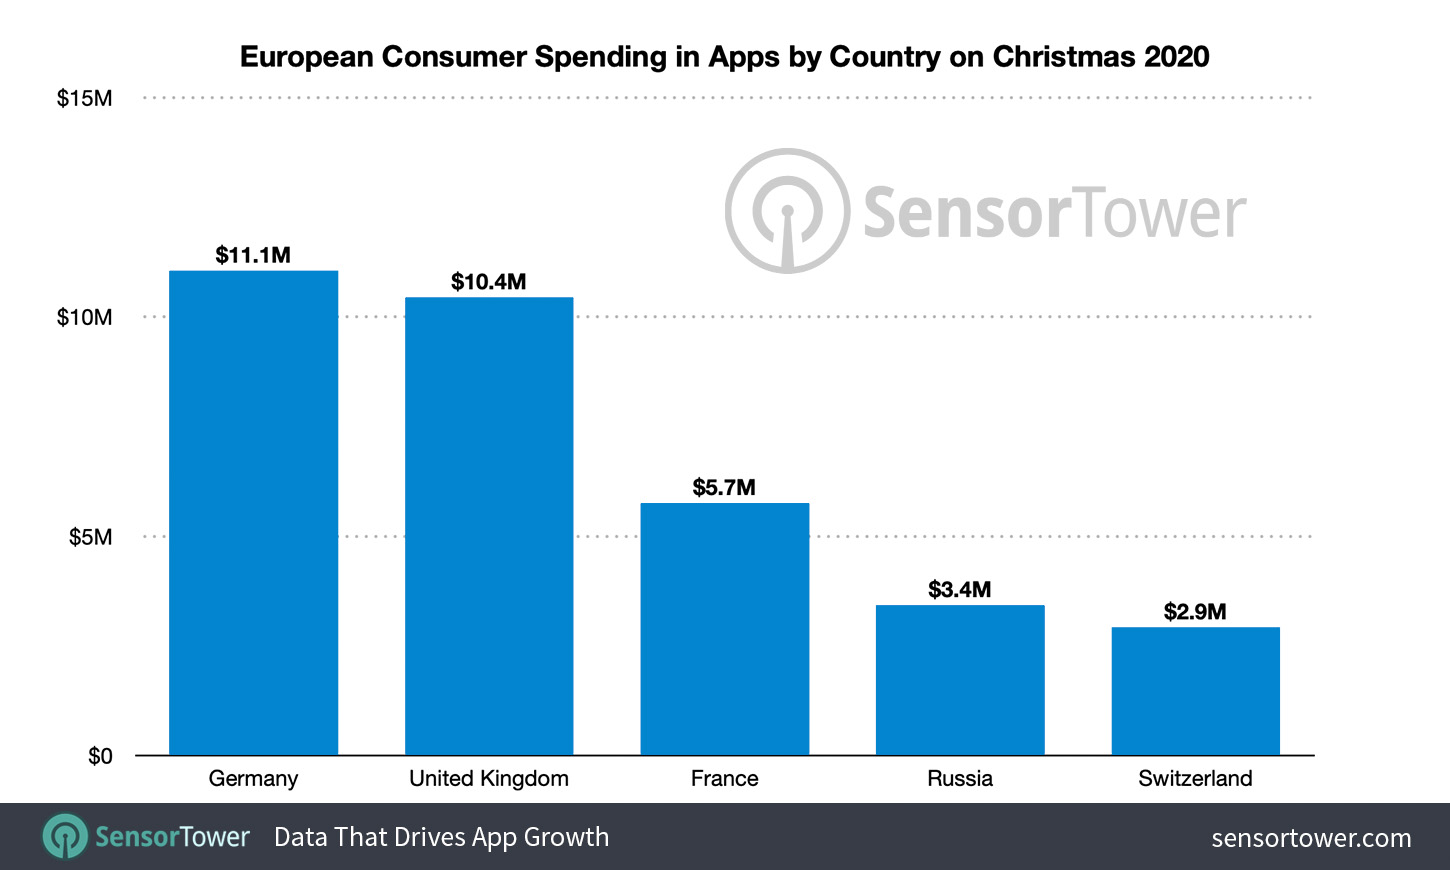 European Consumer Spending in Apps by Country on Christmas 2020